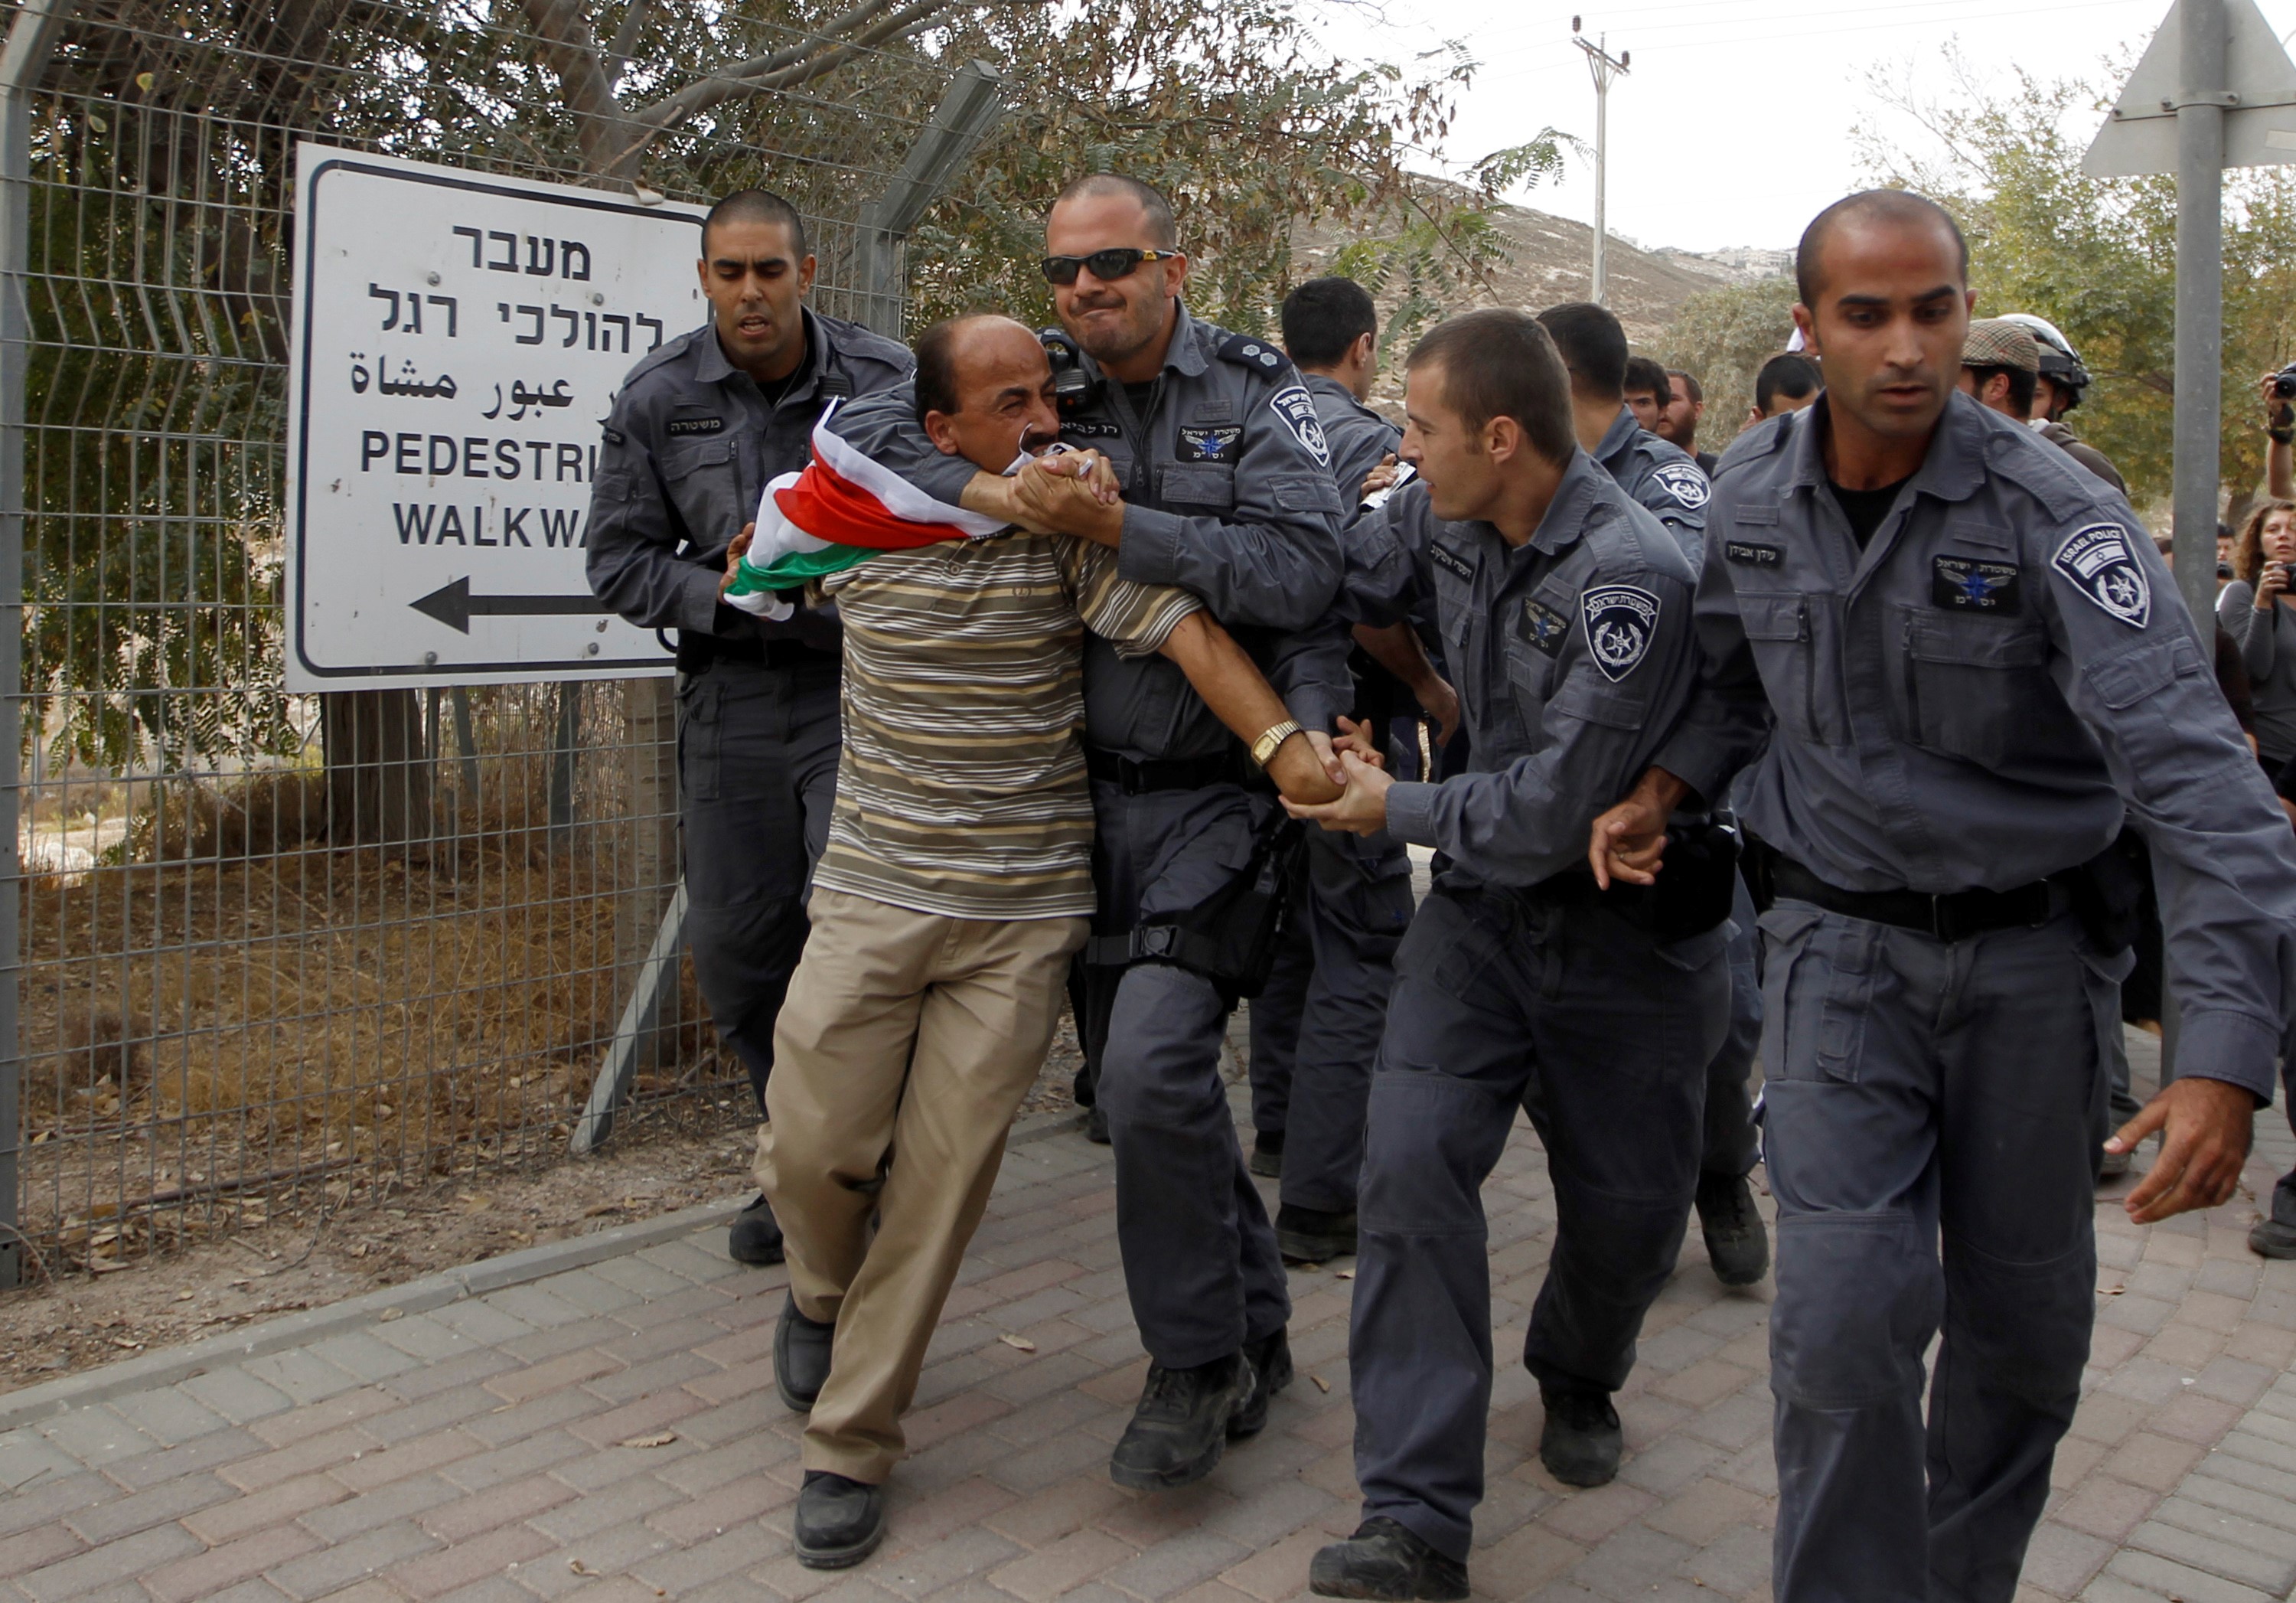 A Palestinian activist being detained by Israeli police during a protest against Jewish settlements (Reuters)